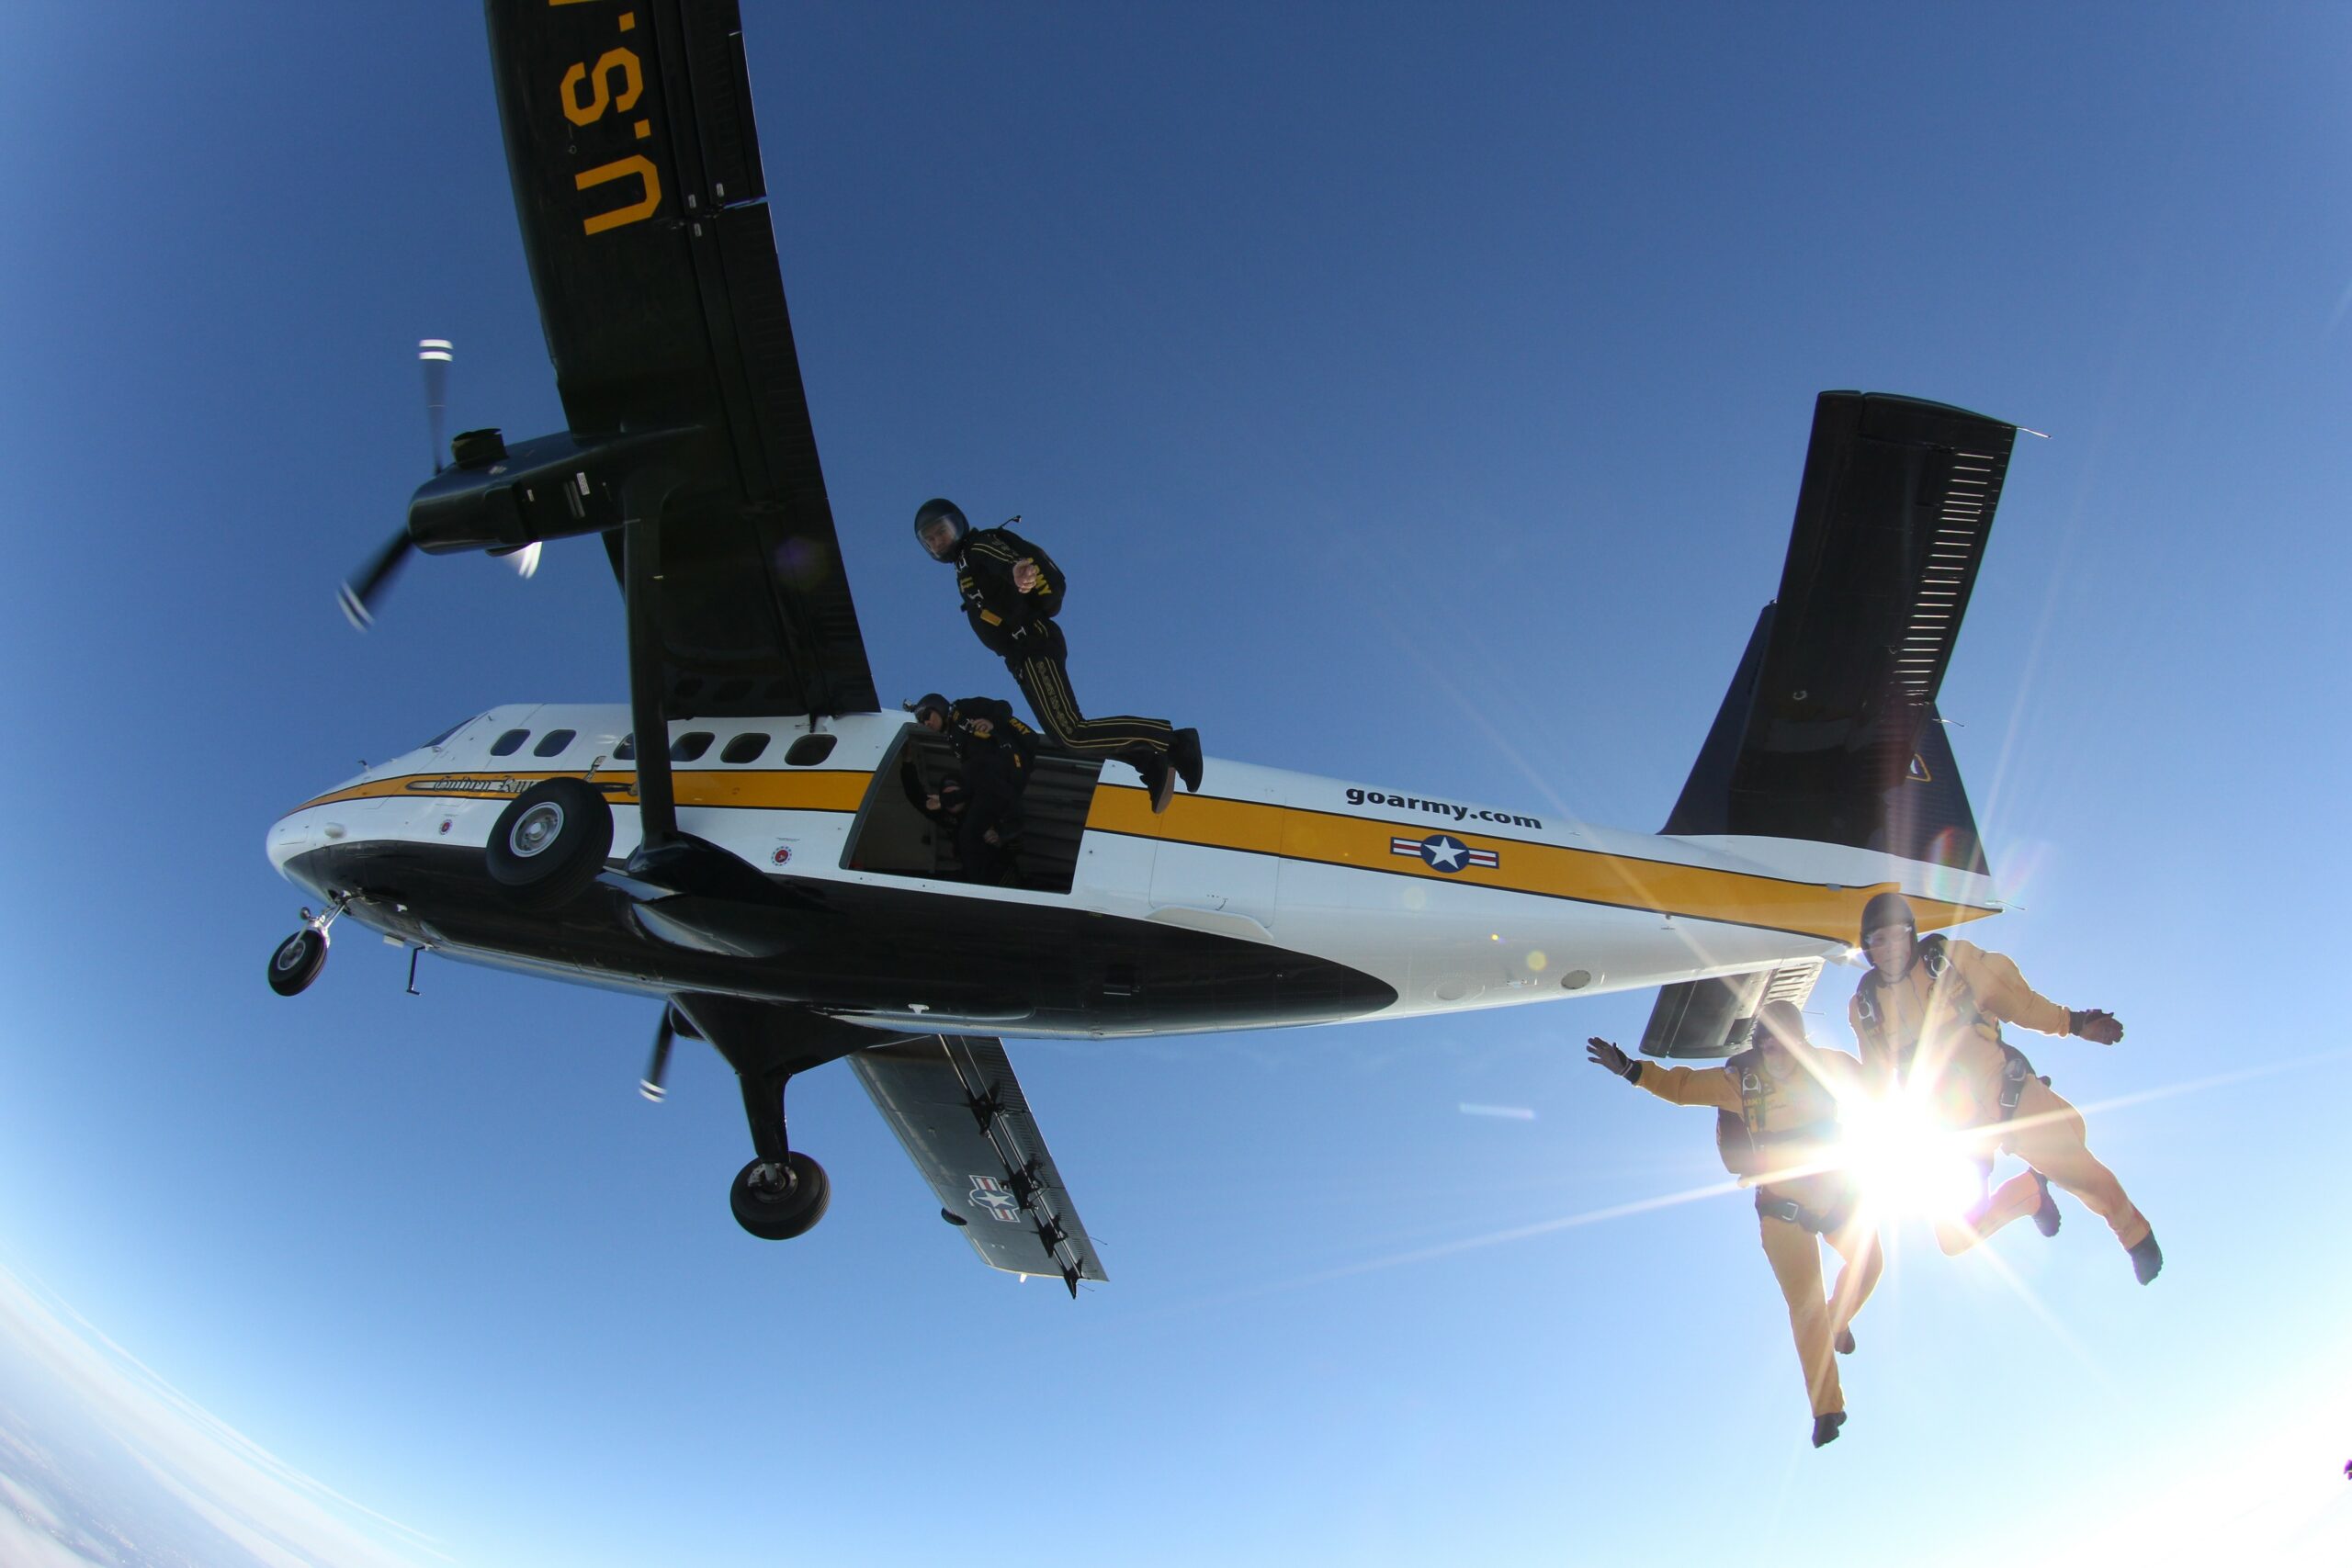 Army Skydiving Team Airplane Triggers Capitol Security Scare and Evacuation